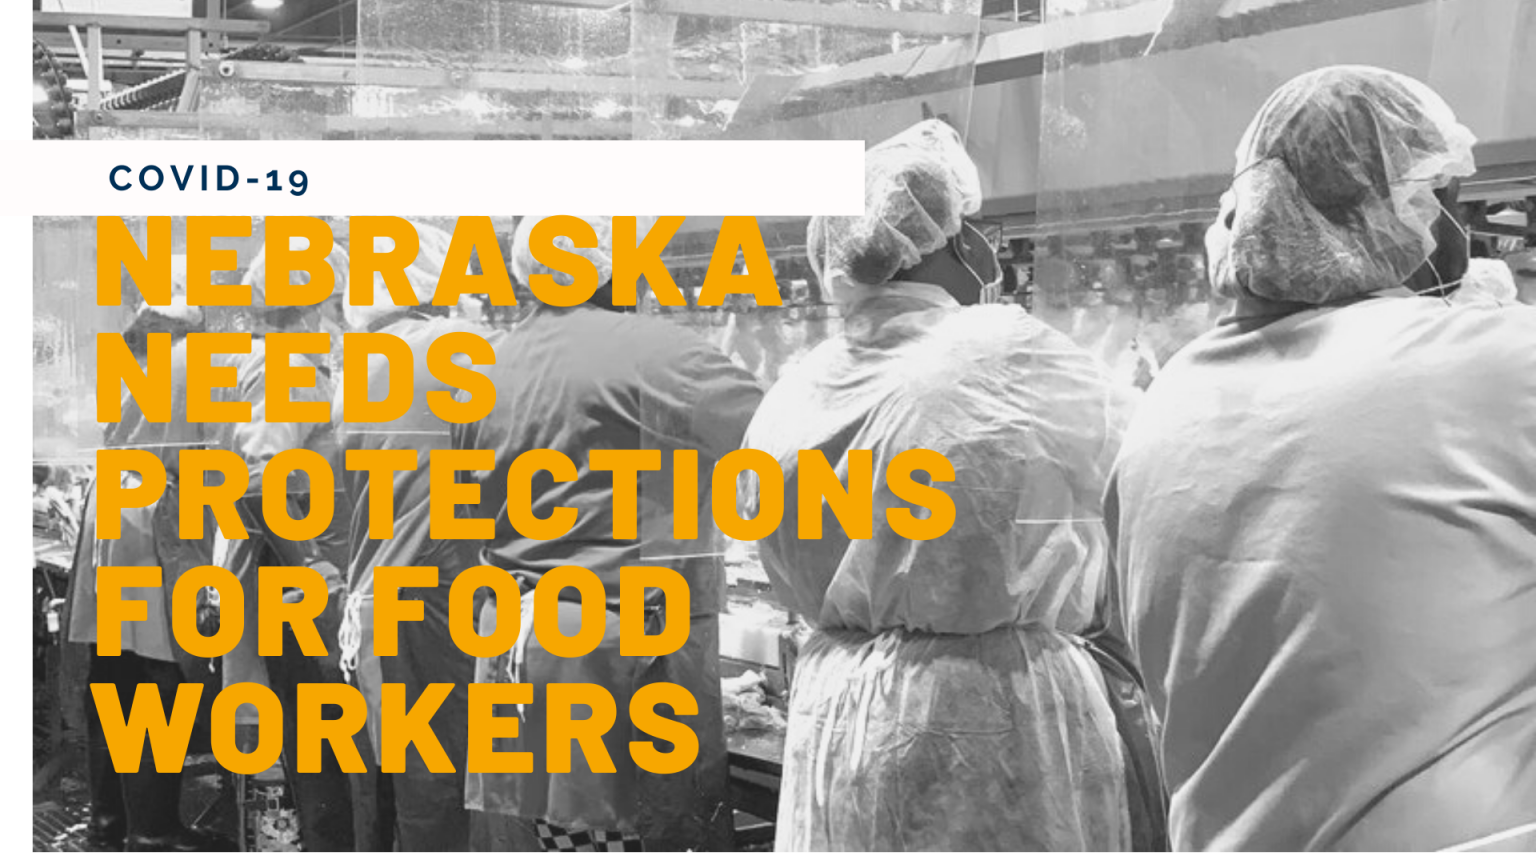 Take Action: Meatpacking Workers Need Essential Protections and Benefits